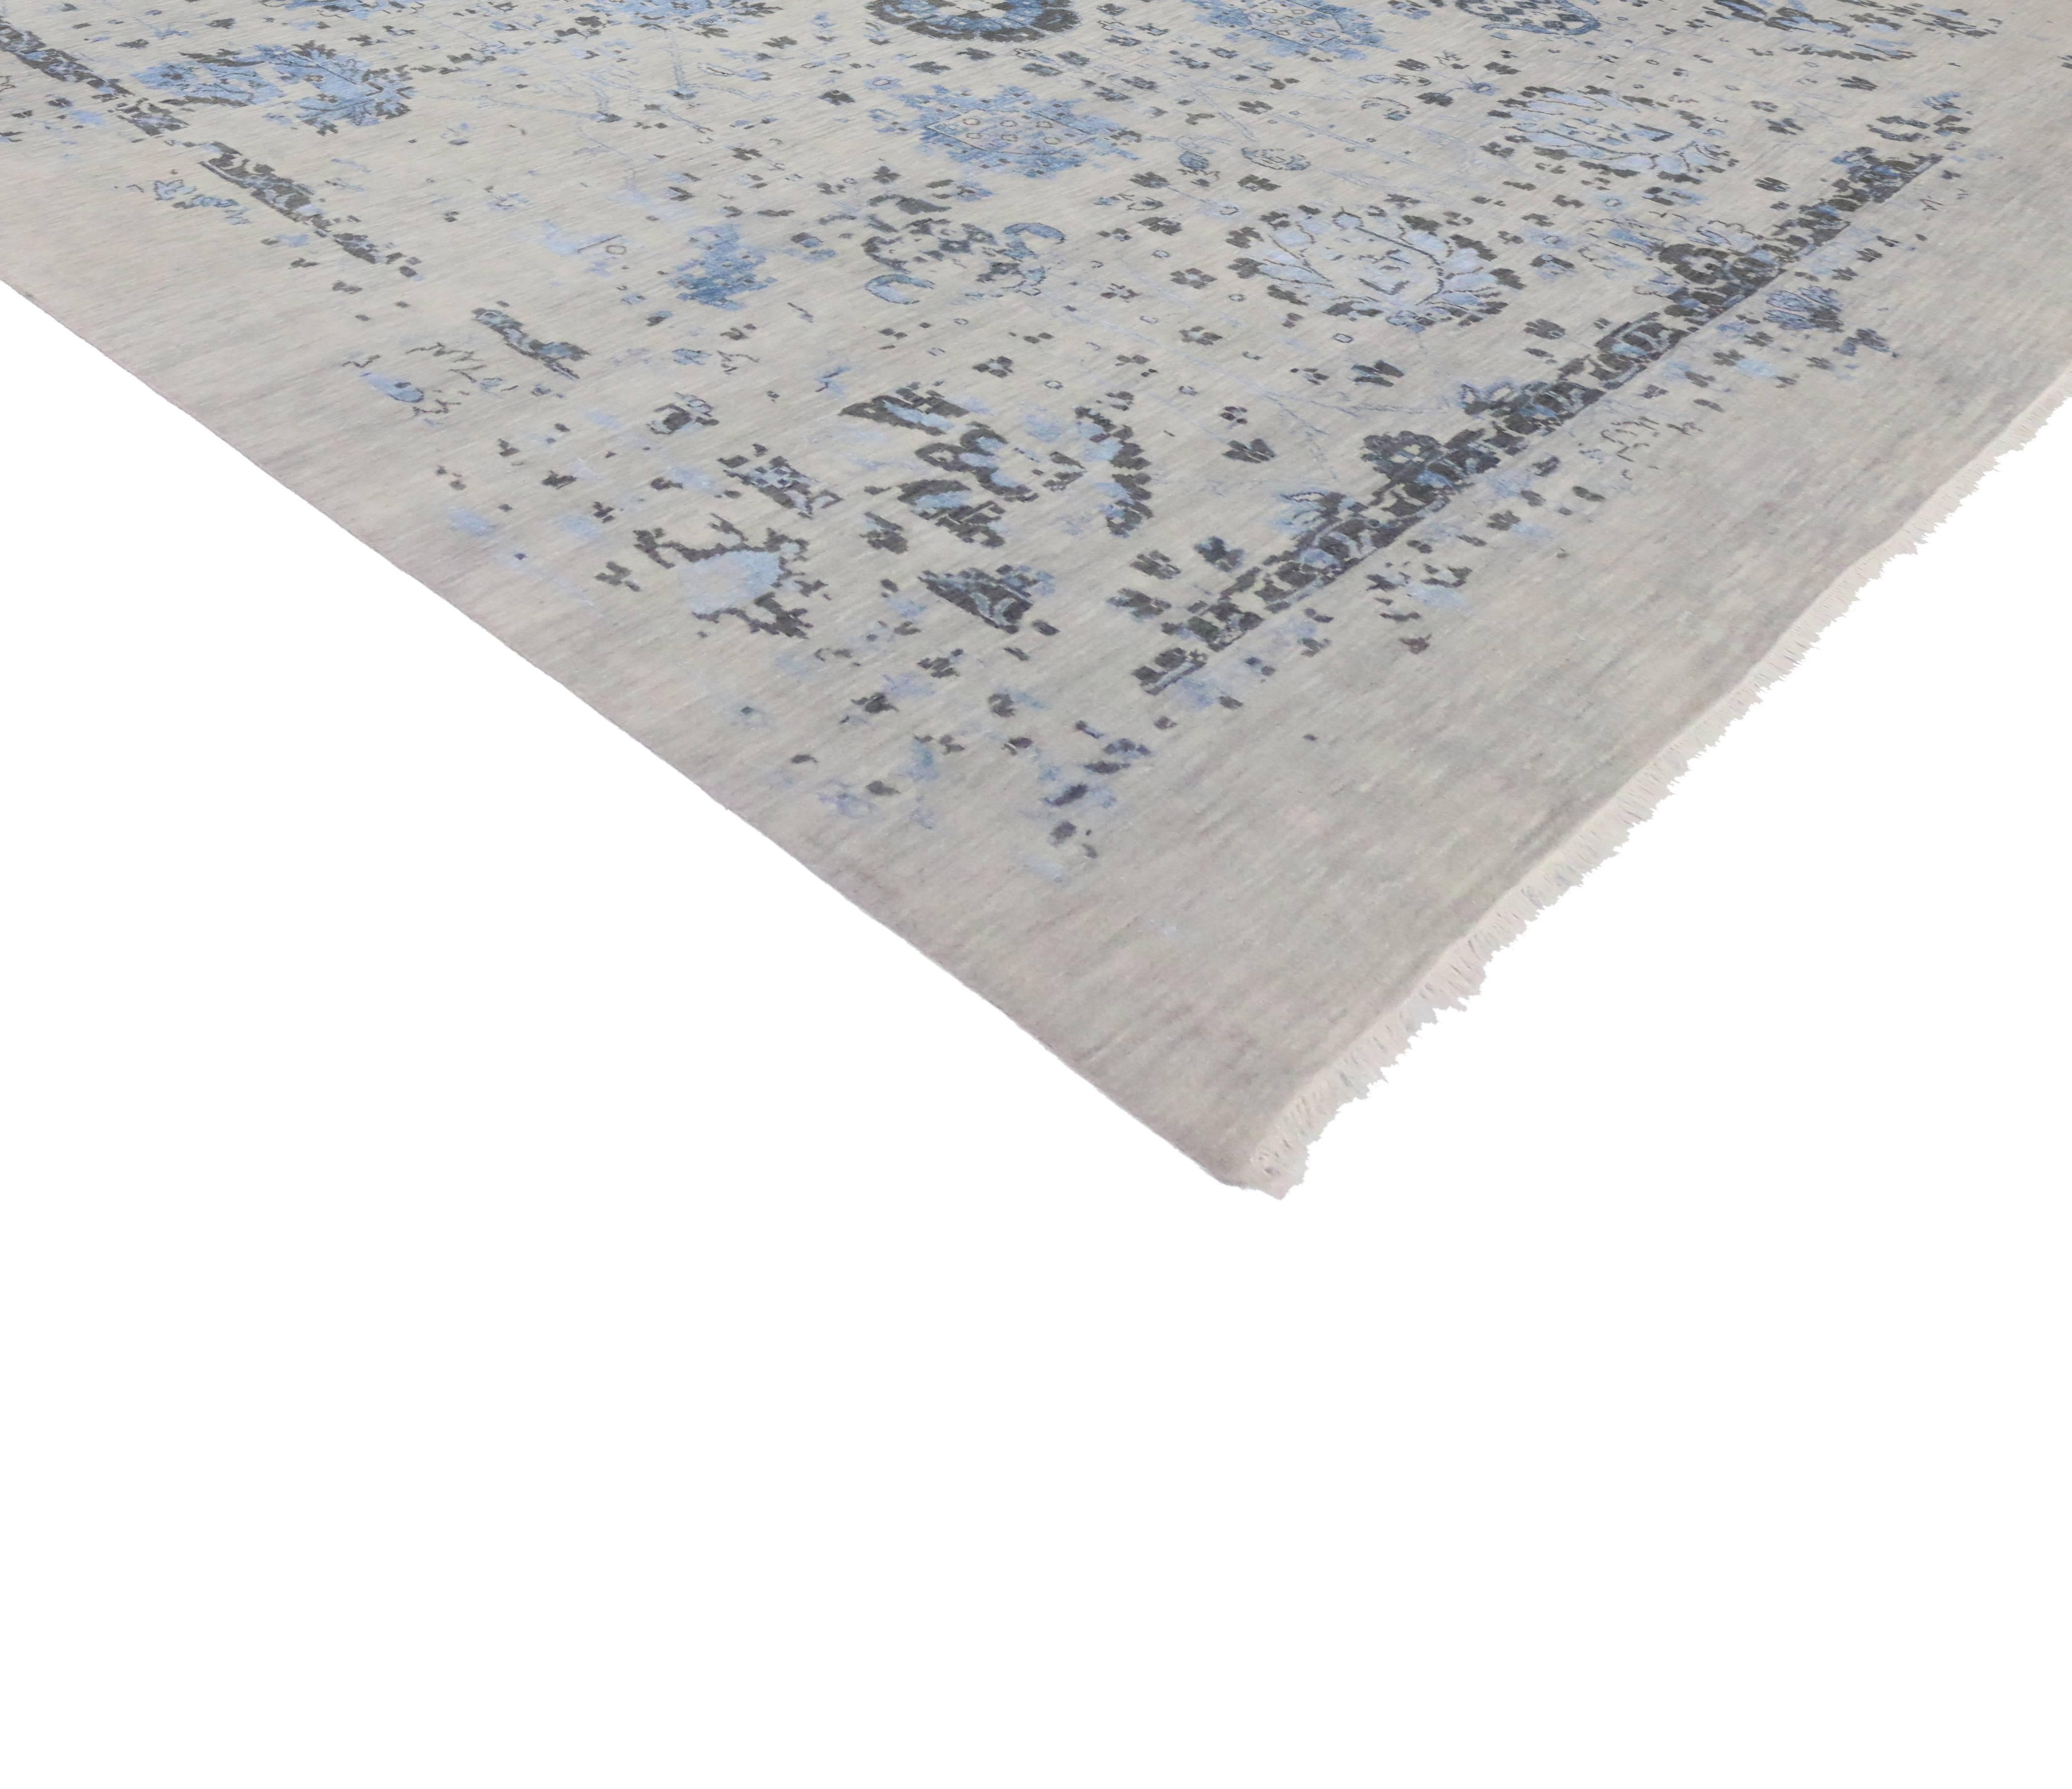 With its element of comfort, artistic statement and functional versatility, this modernized Indian area rug will create a stunning focal point. Rather than sticking to a traditional Oushak style and risking a rather flat outcome, Indian artisans